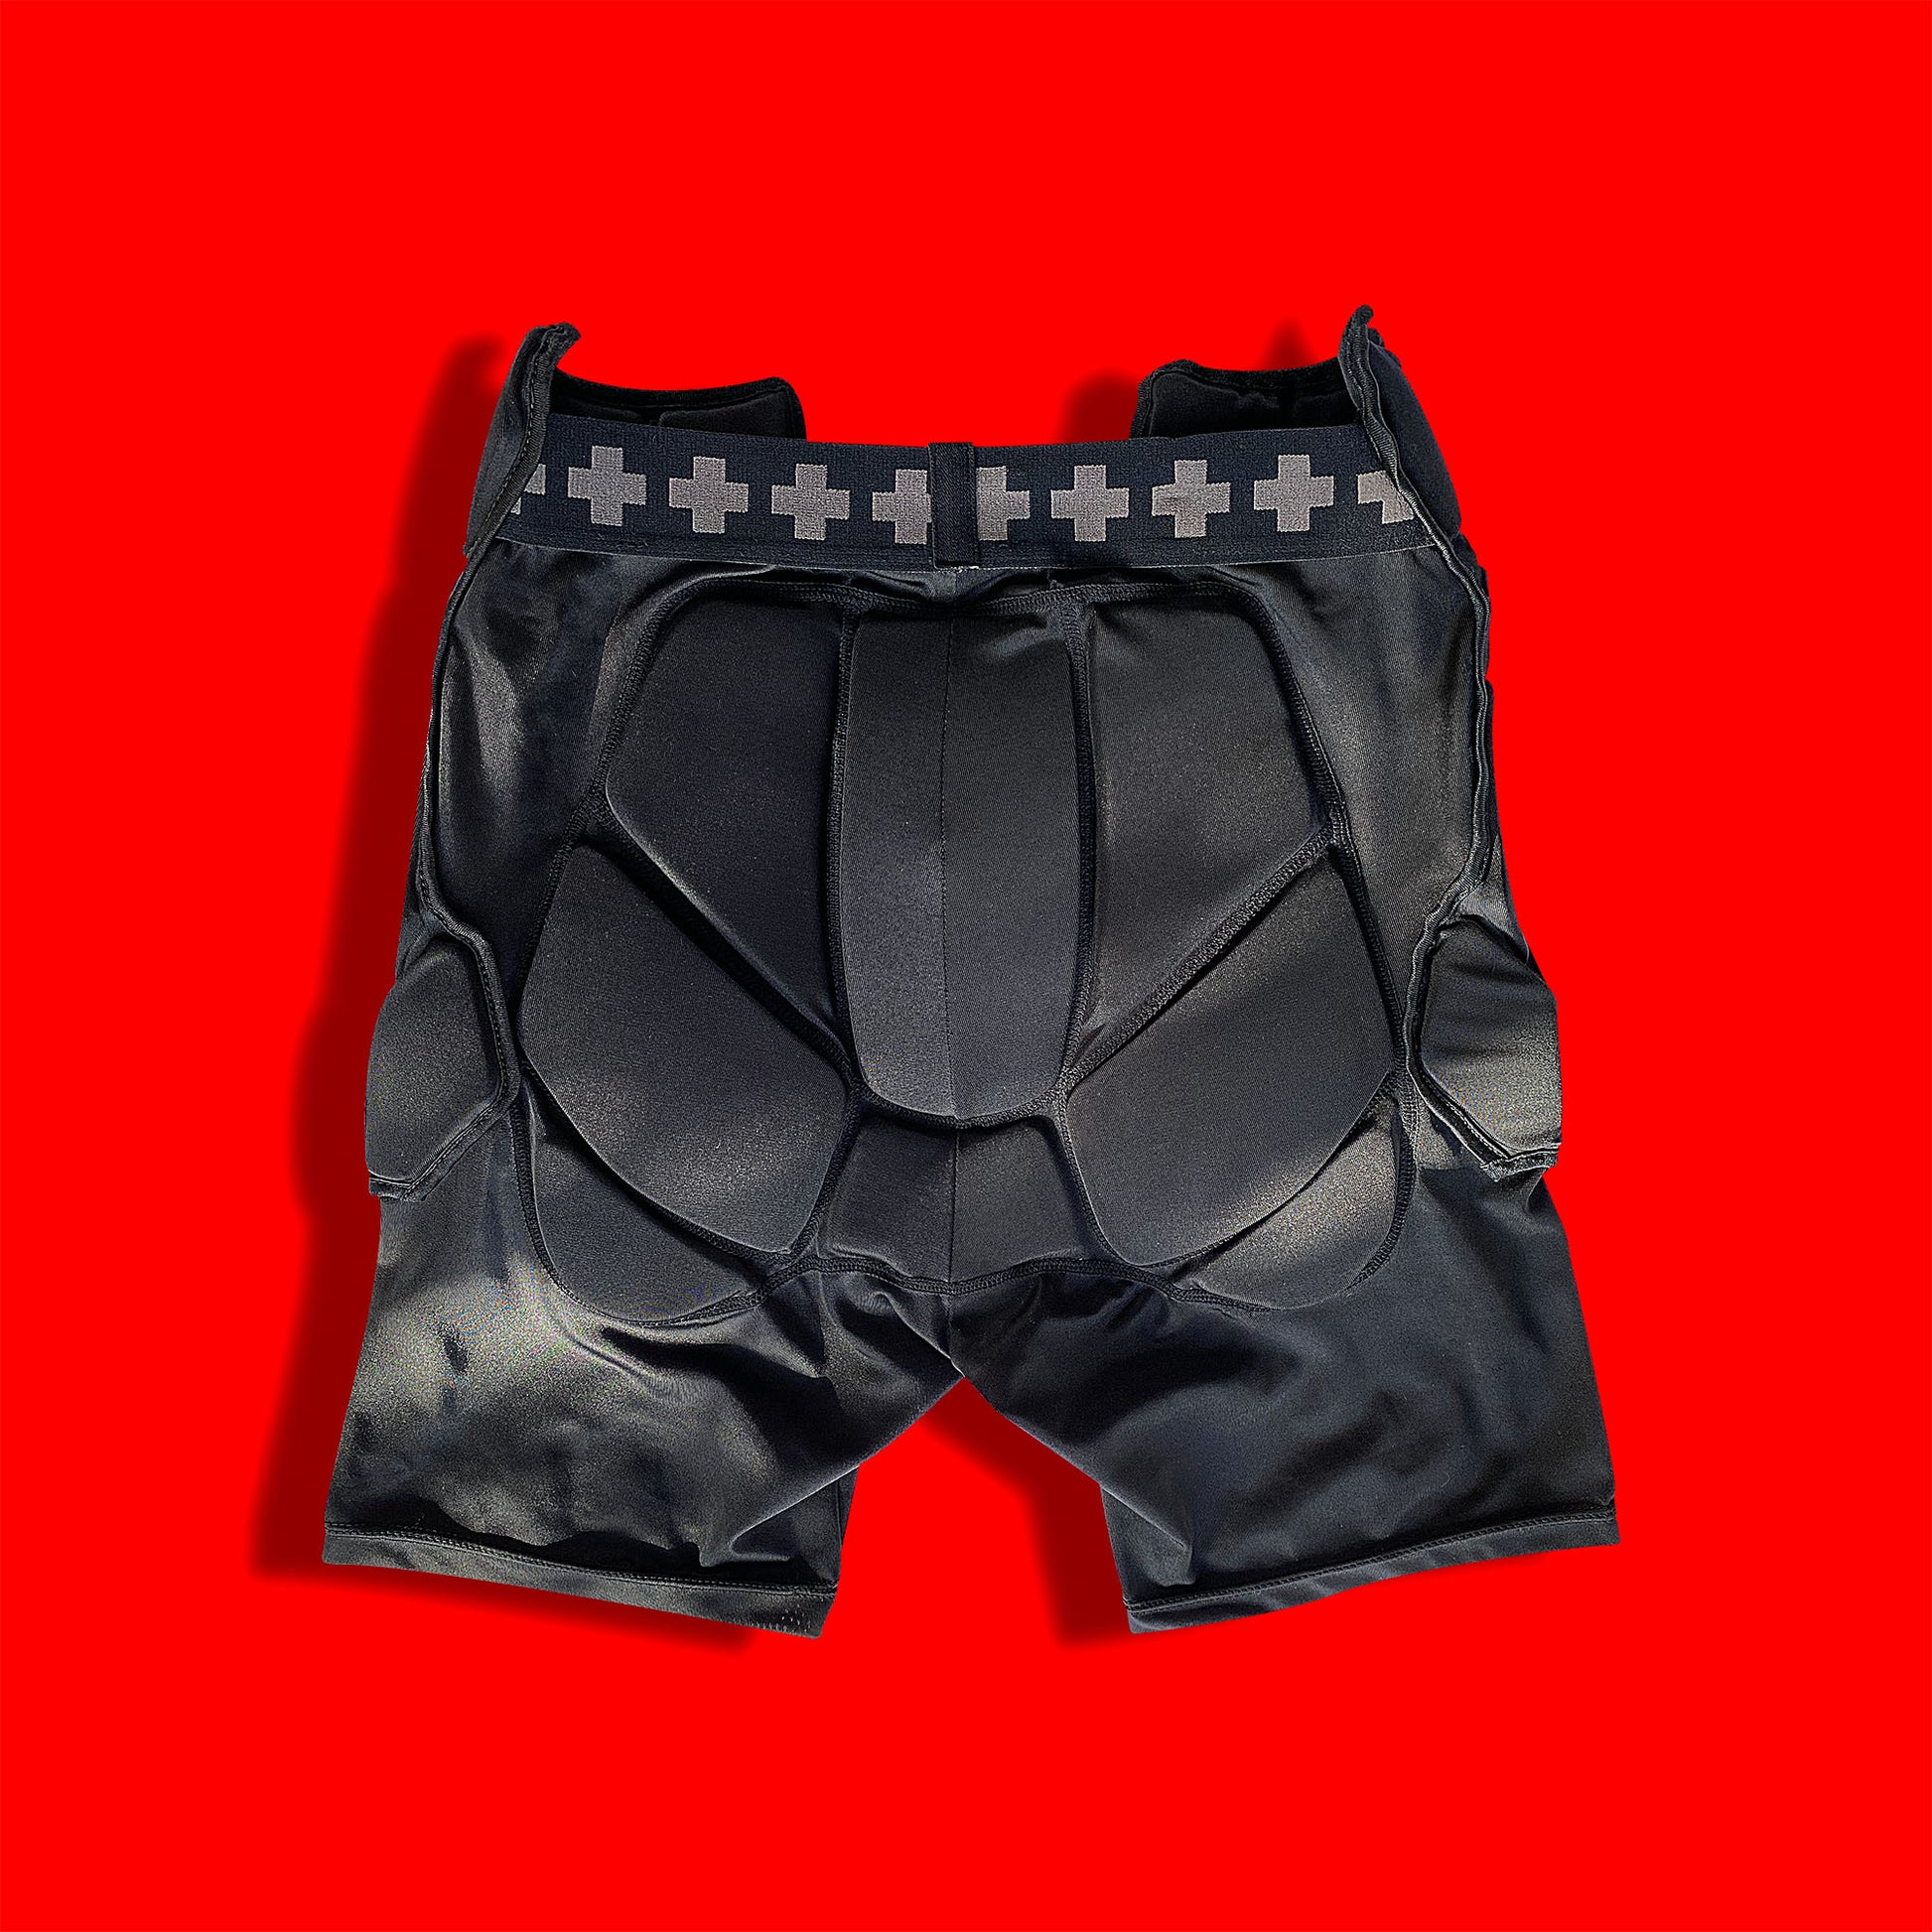 Padded Shorts for Men, Butt Pads for Skating, Padded Compression